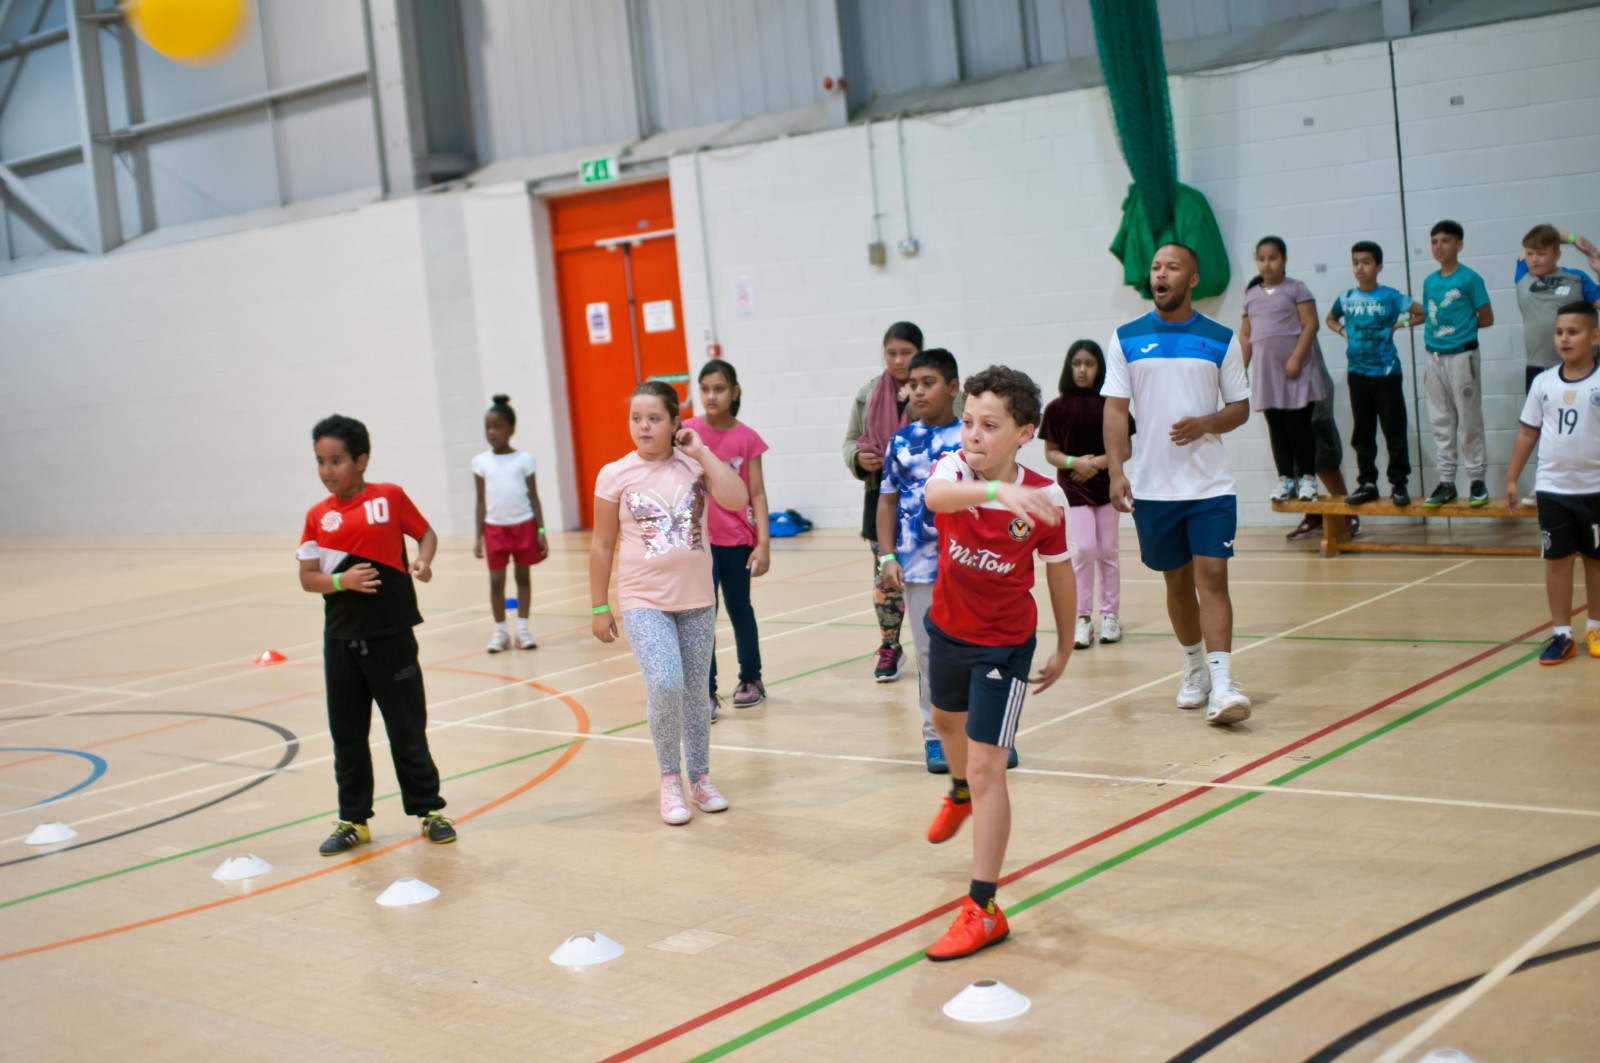 Group of children playing dodgeball